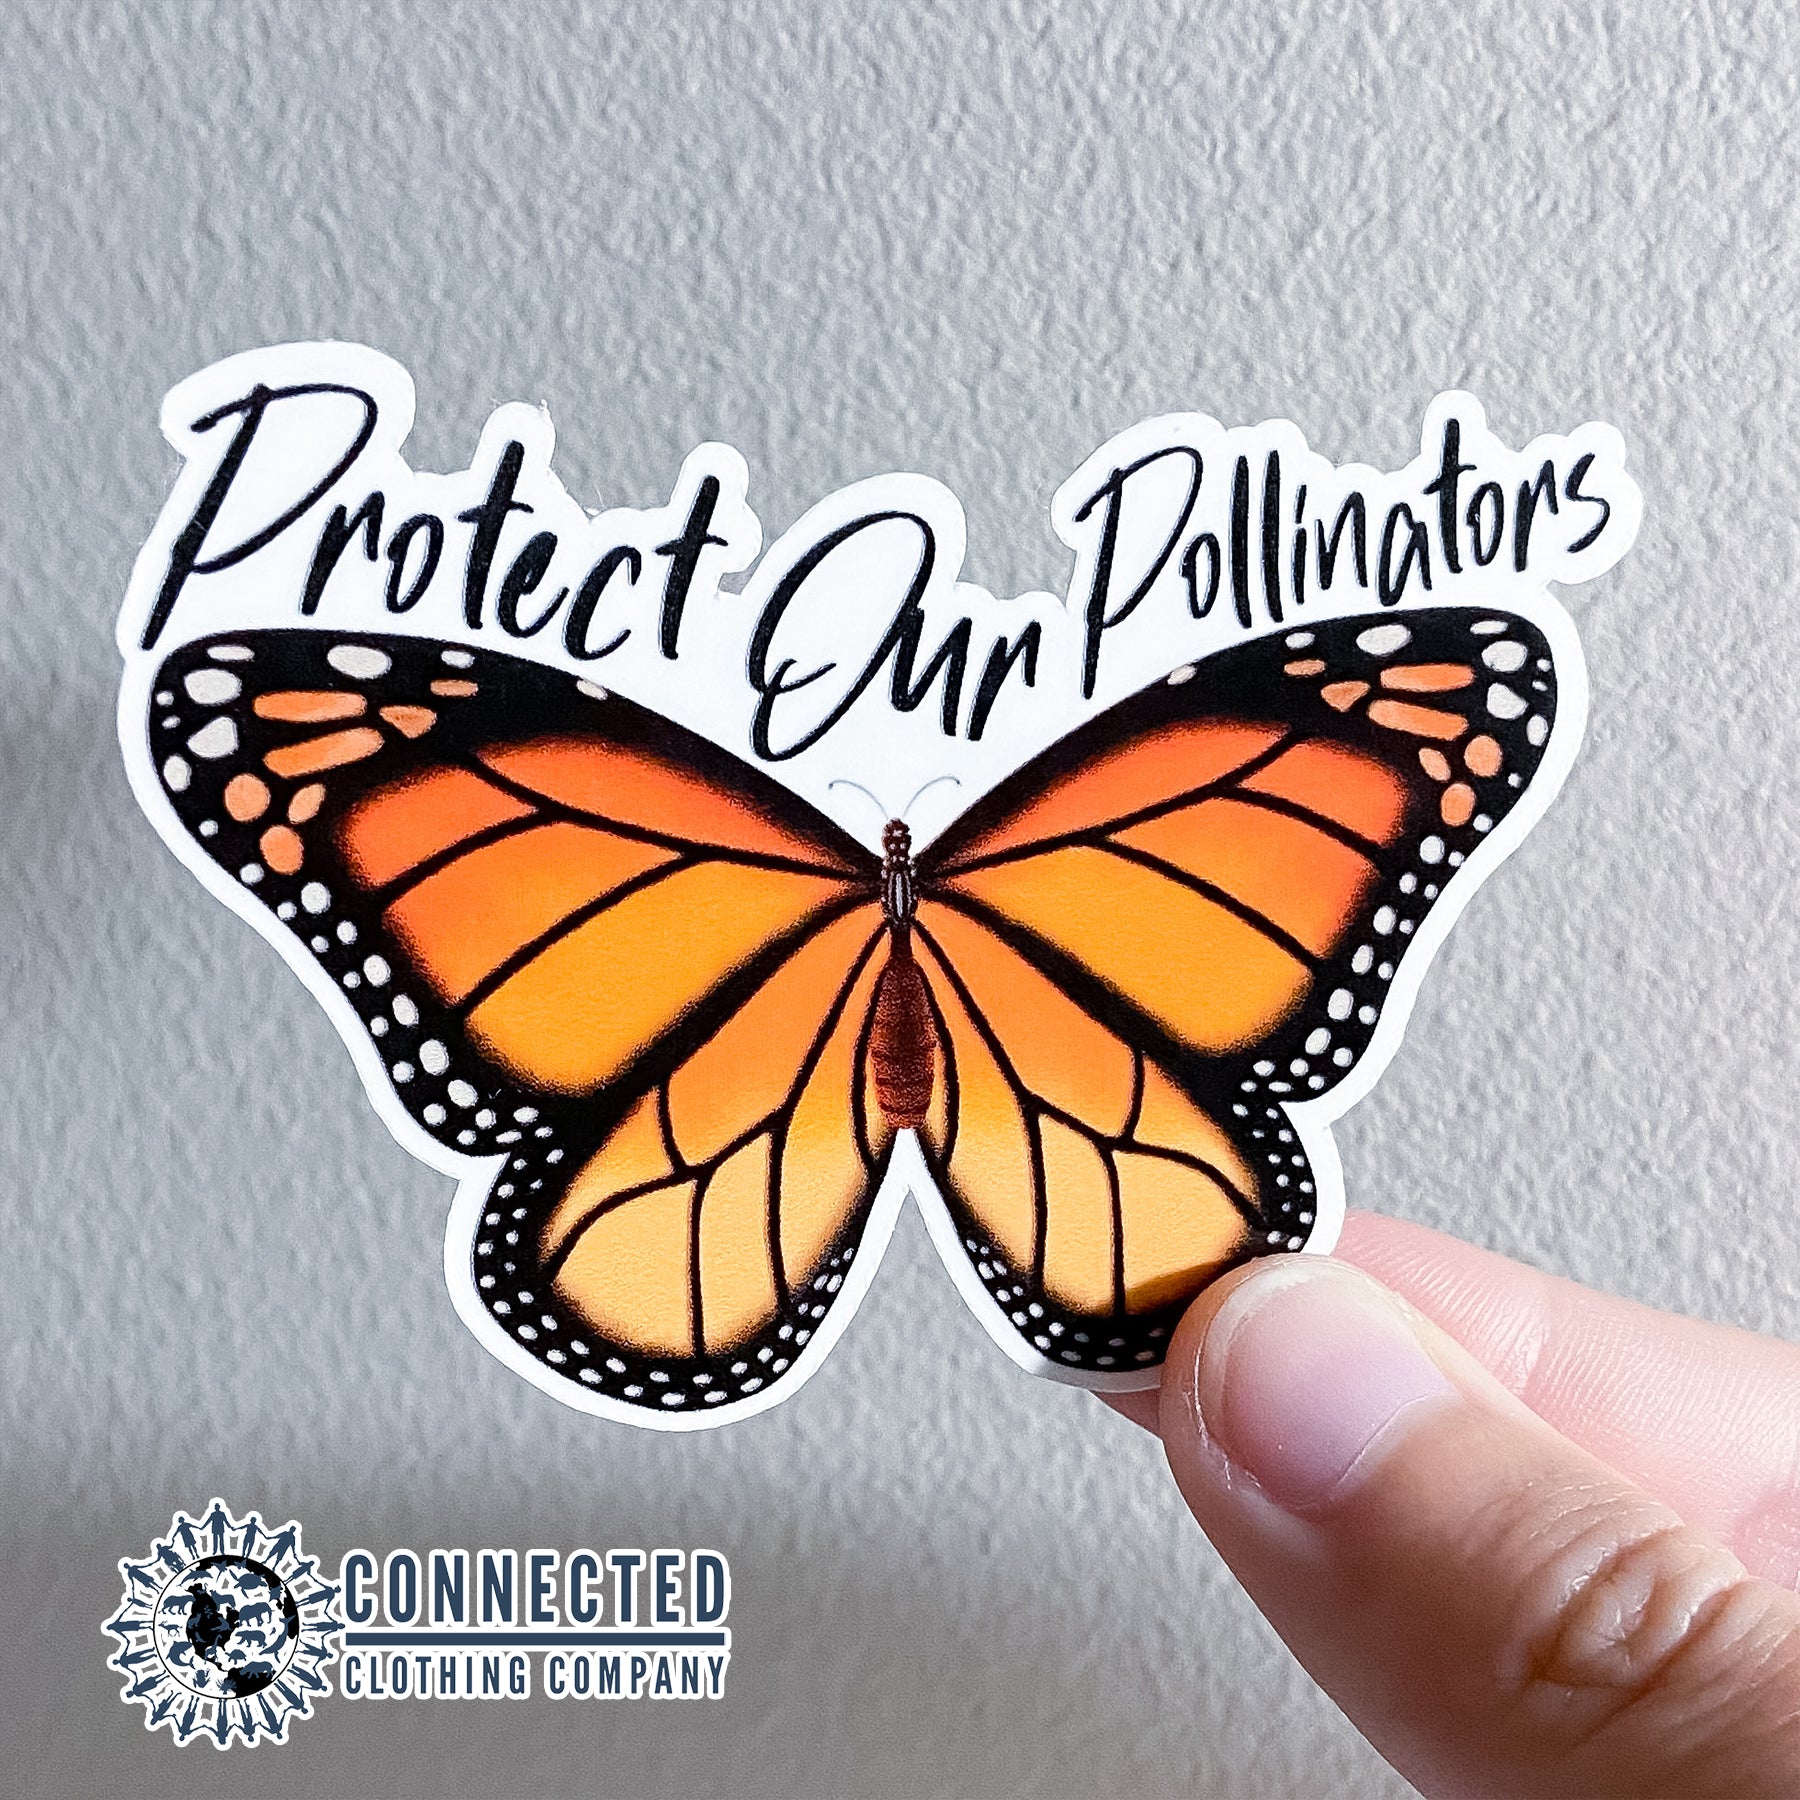 Protect Our Pollinators Sticker - sweetsherriloudesigns - Ethically and Sustainably Made - 10% of profits donated to pollinator and monarch conservation